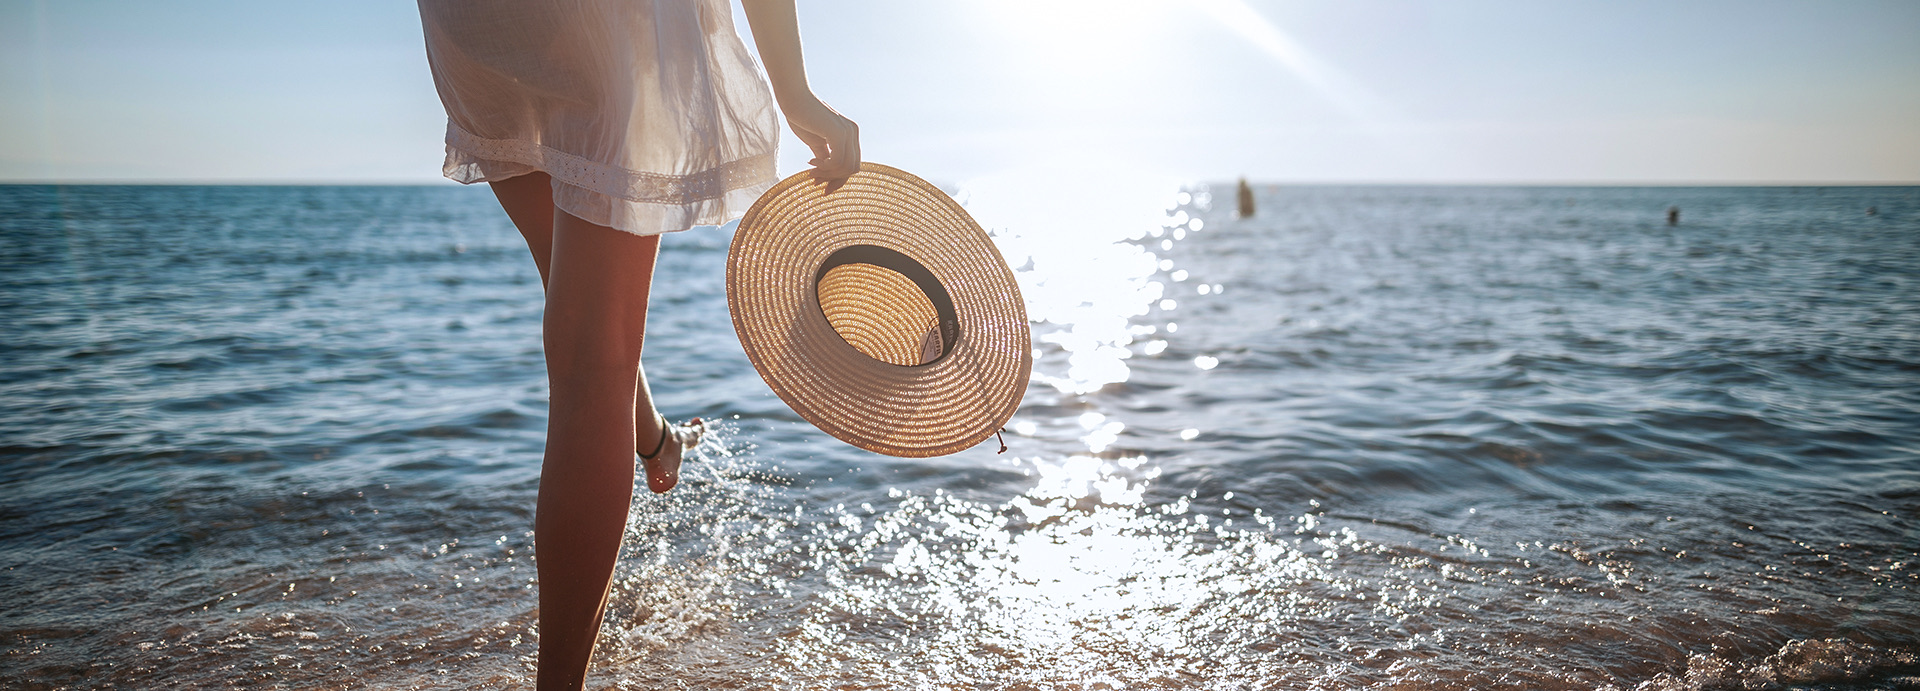 Woman walking into the ocean wearing a white coverup and holding a tan straw hat at sunset.